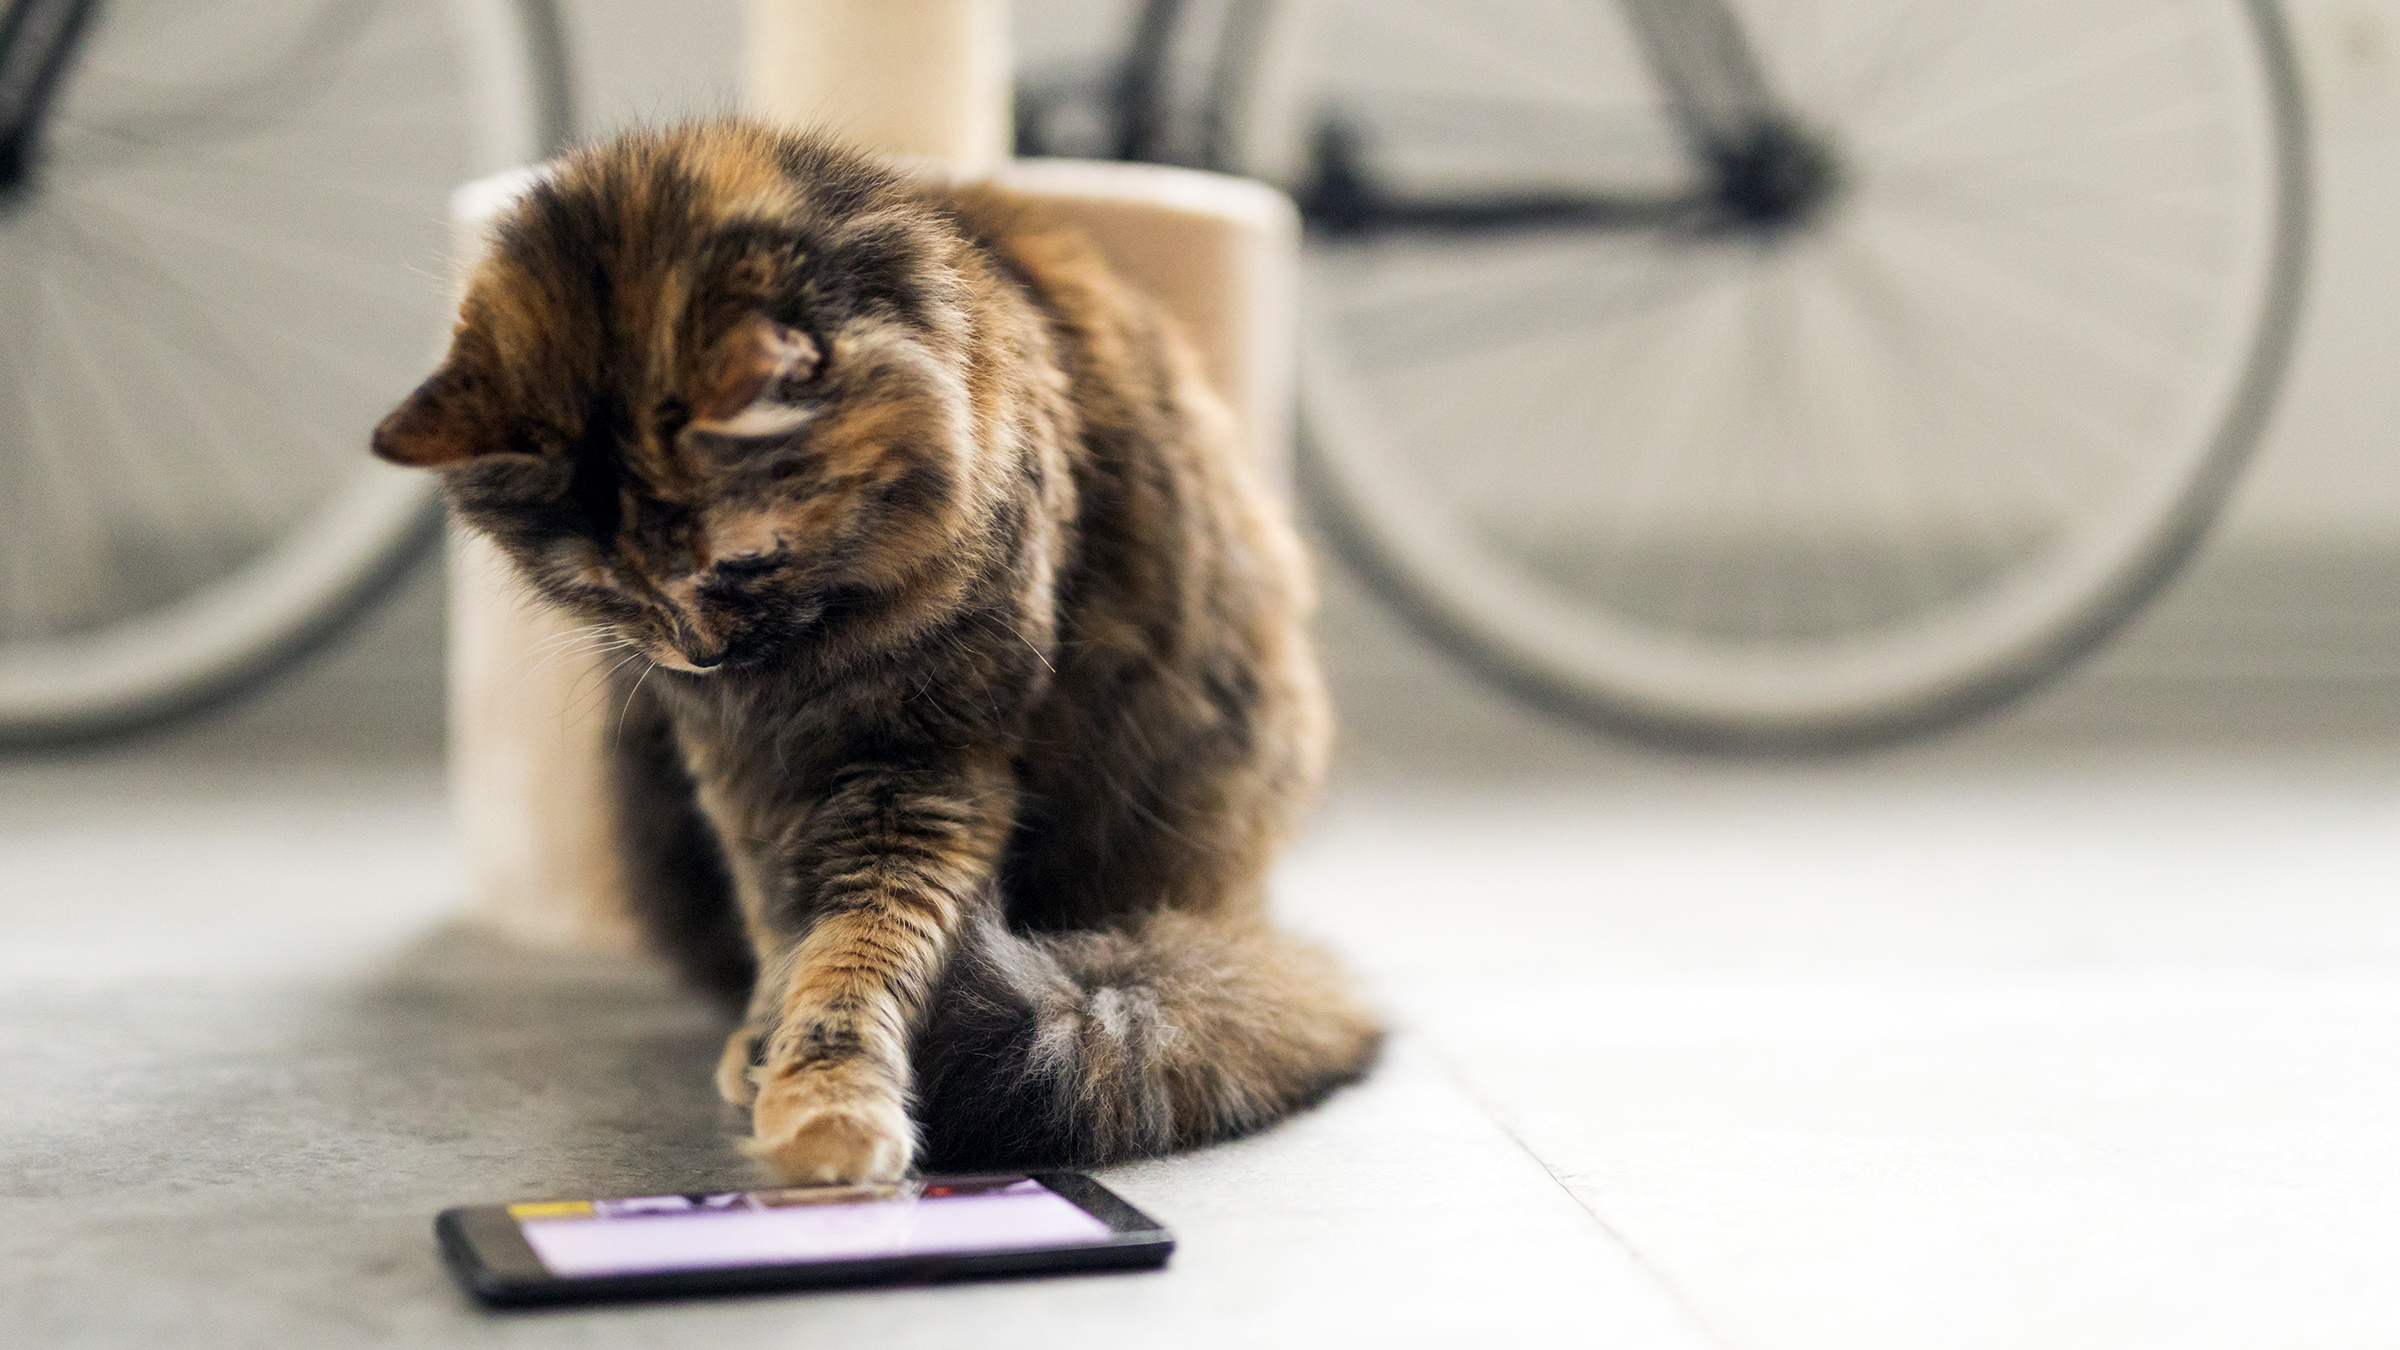 Find Your Feline Instincts With These 5 Online Cat Games